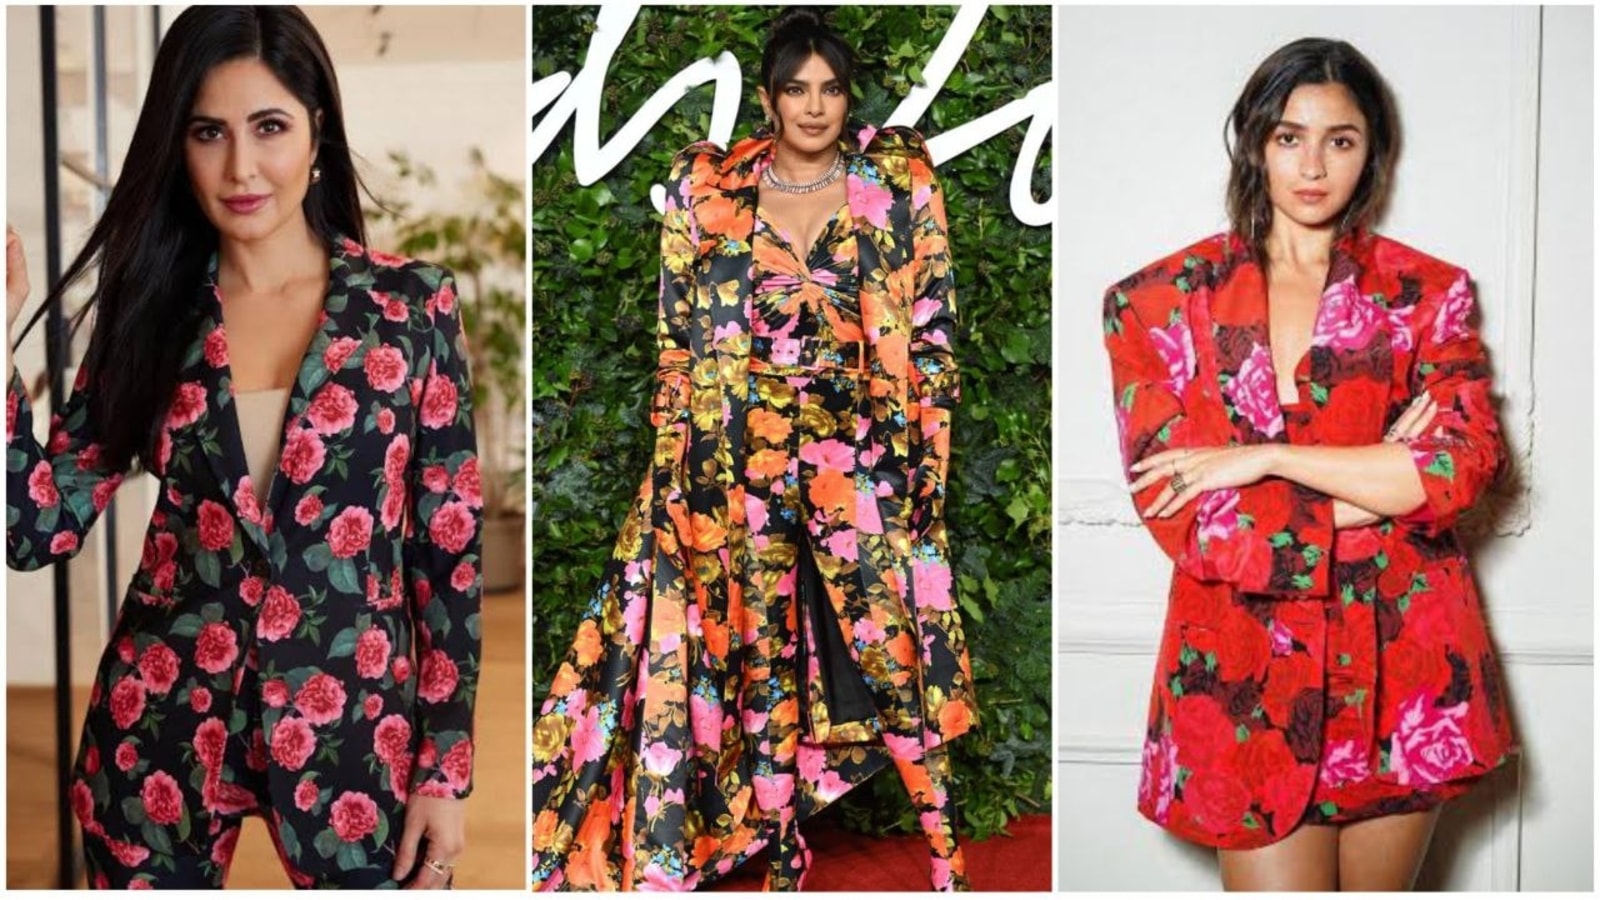 Print On Print Fashion - Style Tips To Wear Different Types Of Prints -  Bewakoof Blog